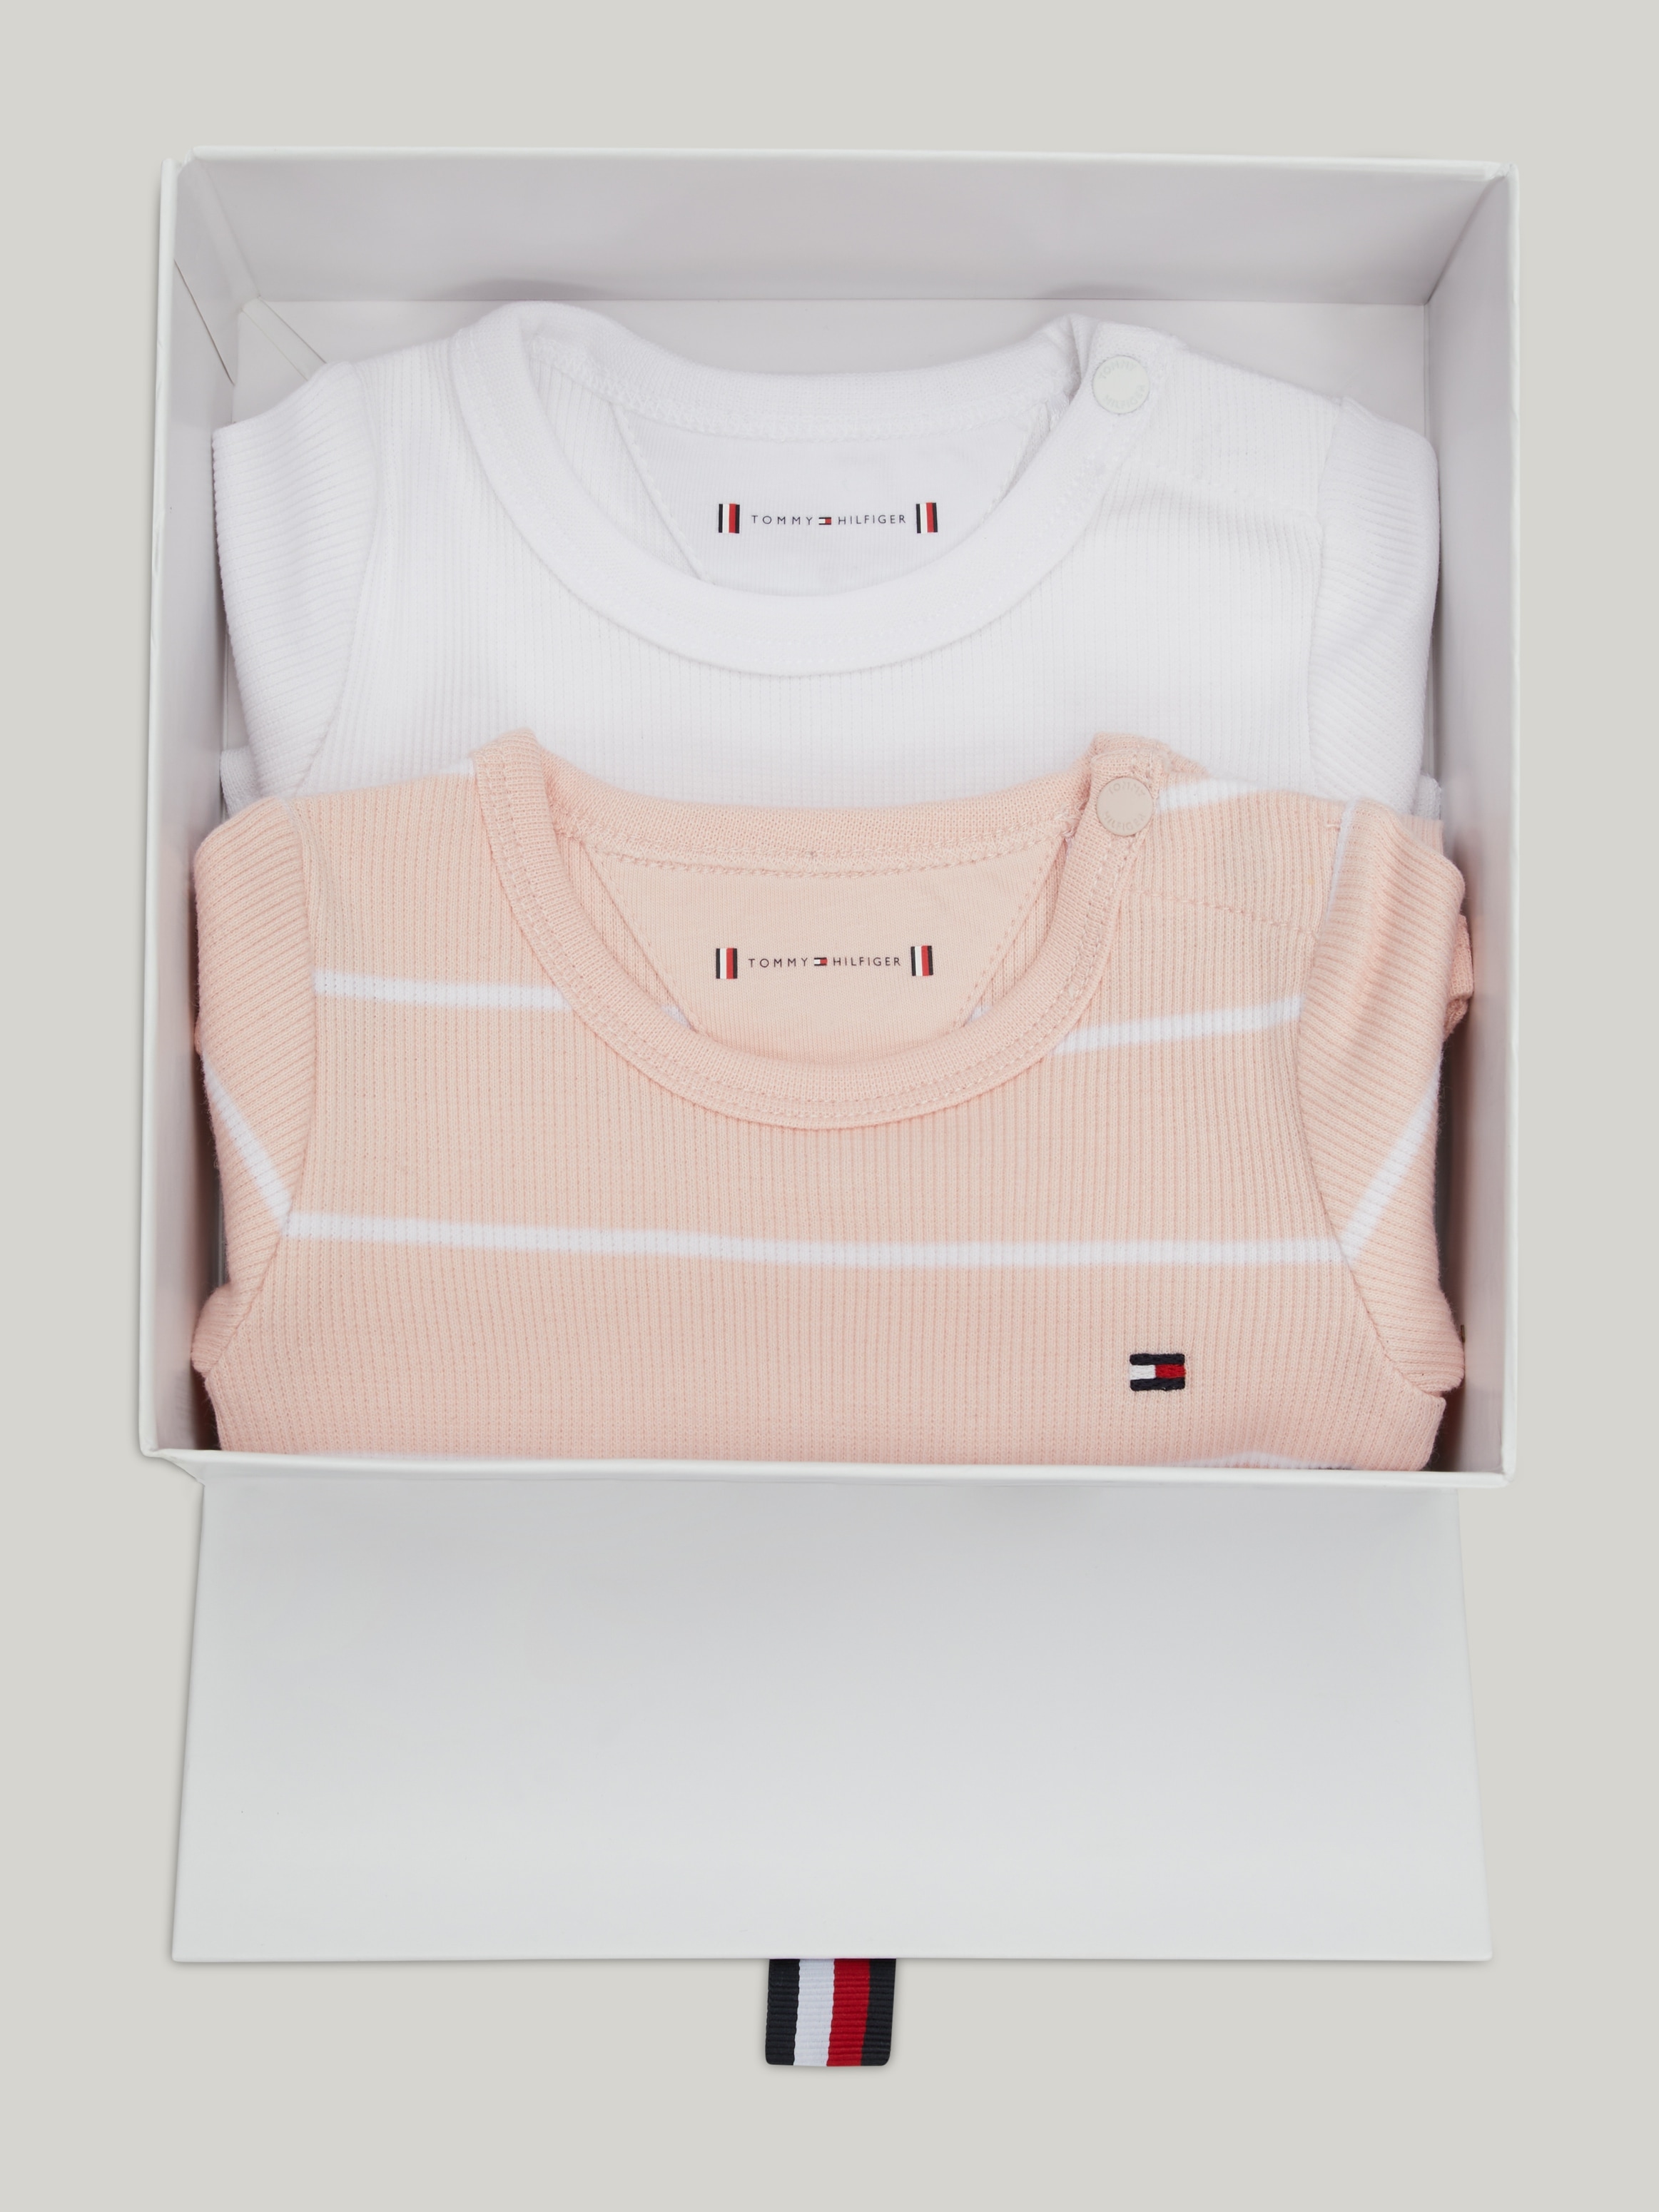 Tommy Hilfiger Kurzarmbody »BABY RIB BODY 2 PACK GIFTBOX«, (Packung, 2 tlg., 2er-Pack), Baby bis 2 Jahre